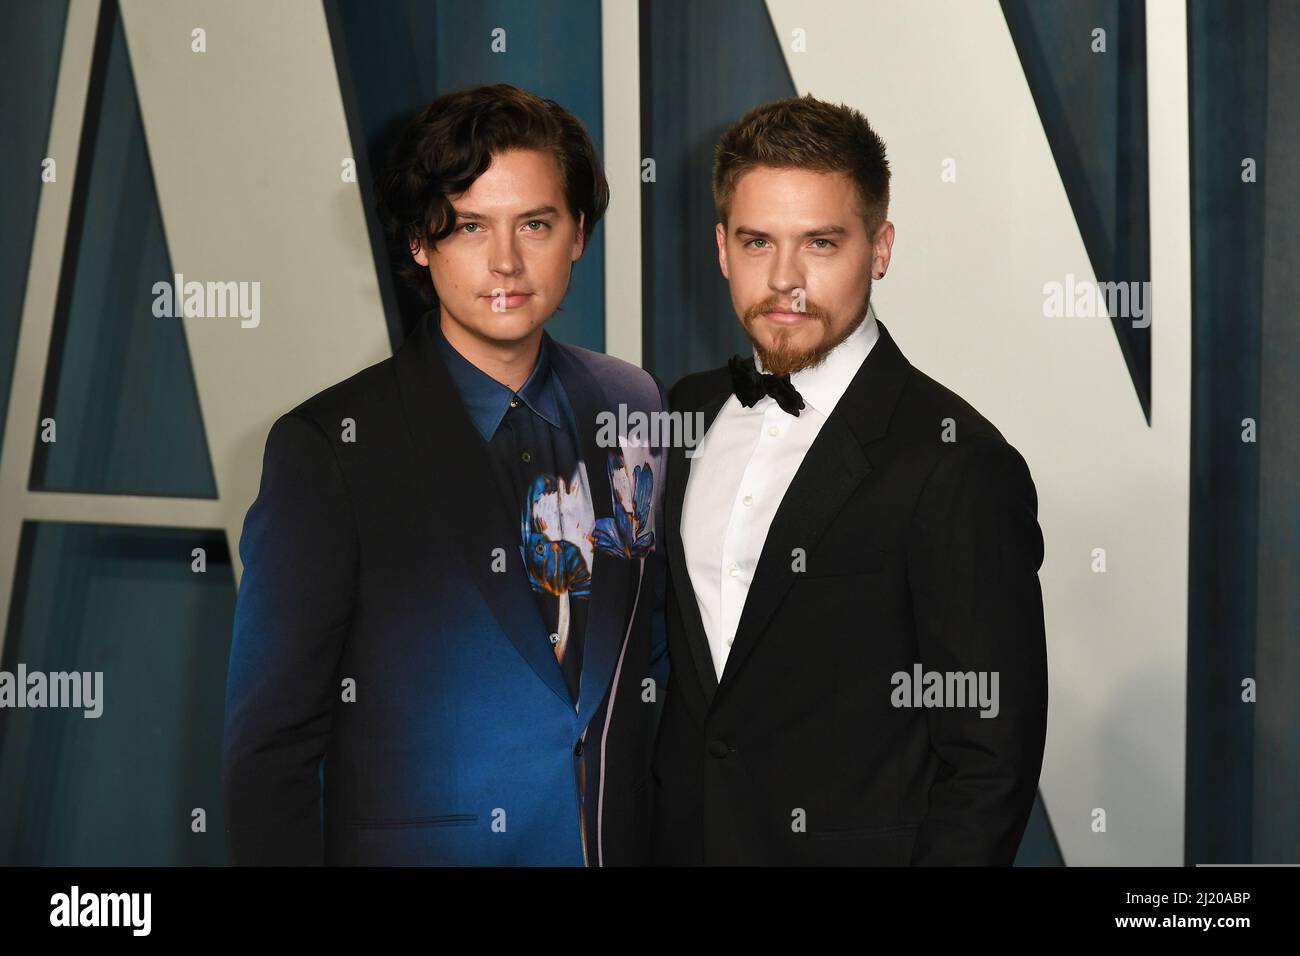 Beverly Hills, USA. 27th Mar, 2022. Cole Sprouse and Dylan Sprouse attends the 2022 Vanity Fair Oscar Party at the Wallis Annenberg Center for the Performing Arts on March 27, 2022 in Beverly Hills, California. Photo: Casey Flanigan/imageSPACE Credit: Imagespace/Alamy Live News Stock Photo